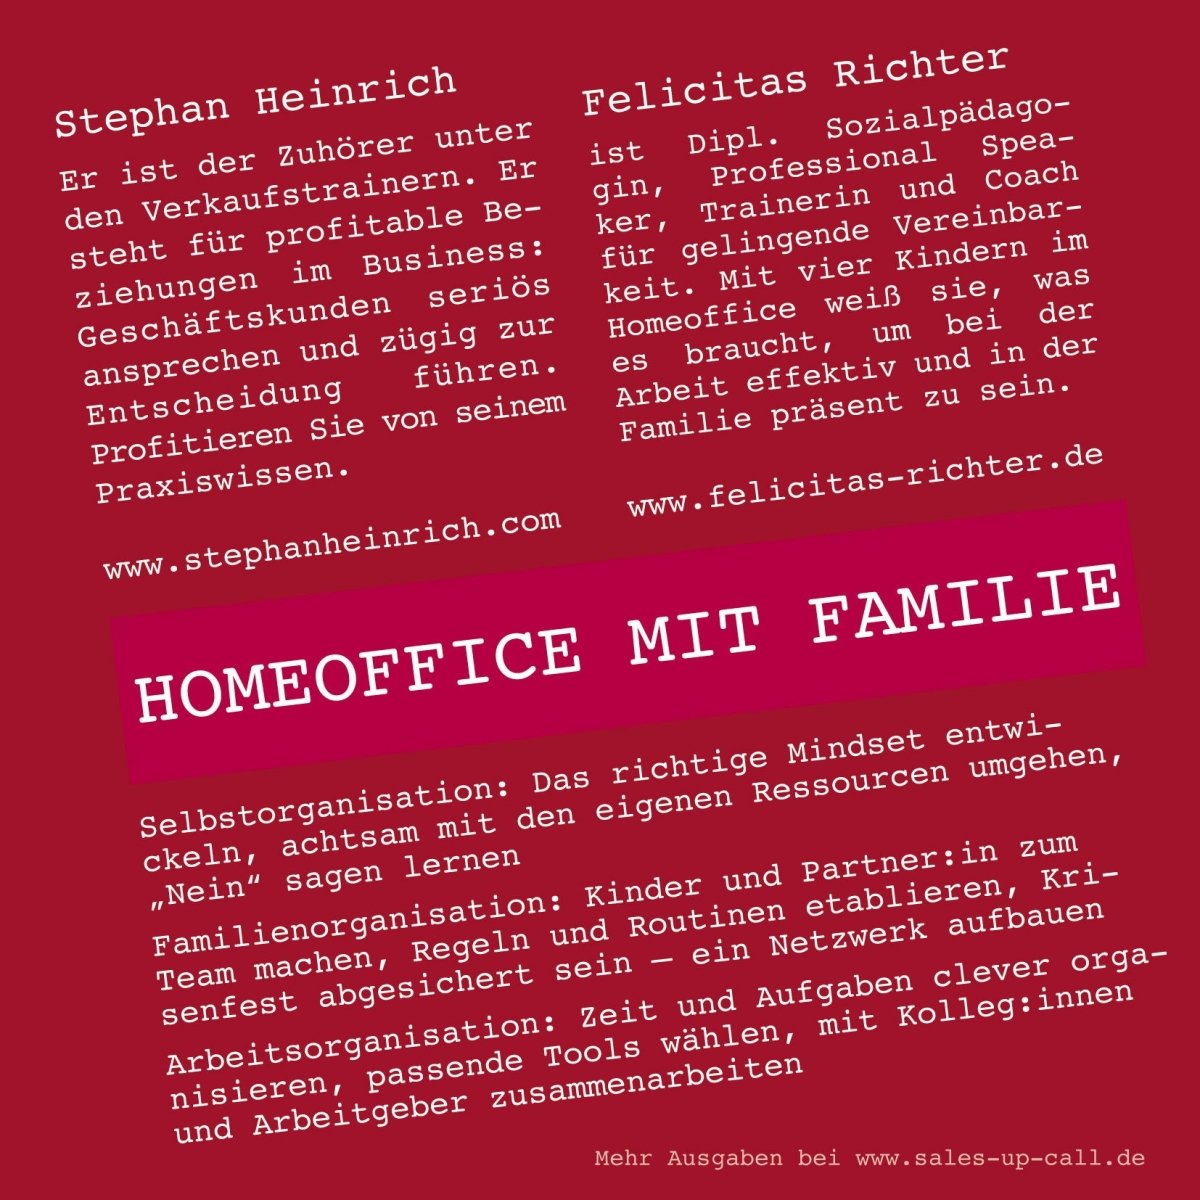 HomeOffice mit Familie - Sales-up-Call - Stephan Heinrich